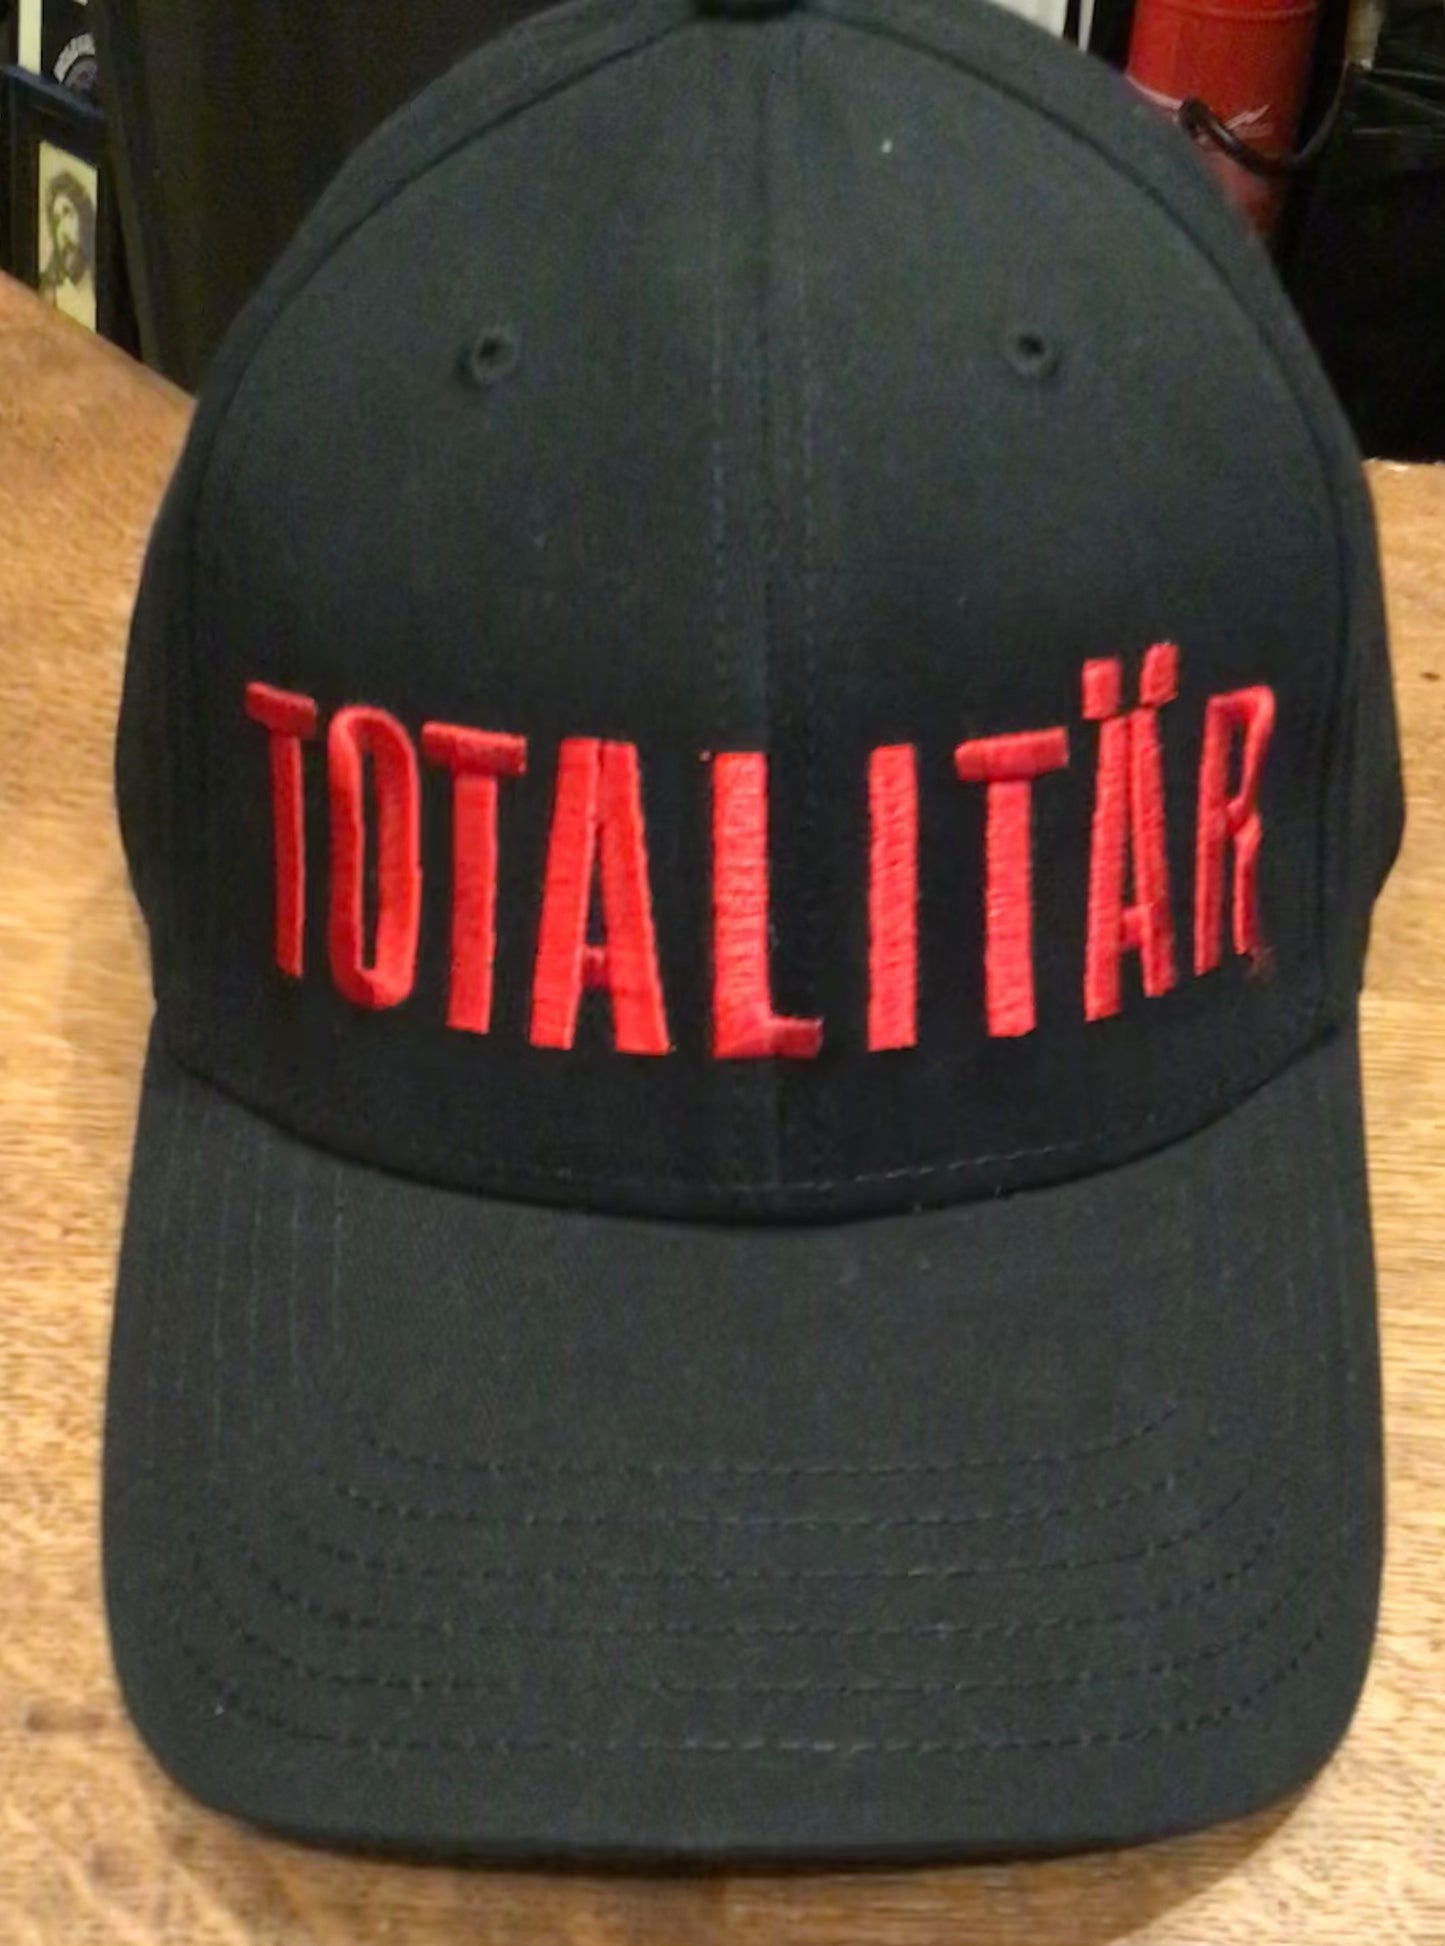 Totalitär red logo Baseball Cap by Insane//Phobia embroidery